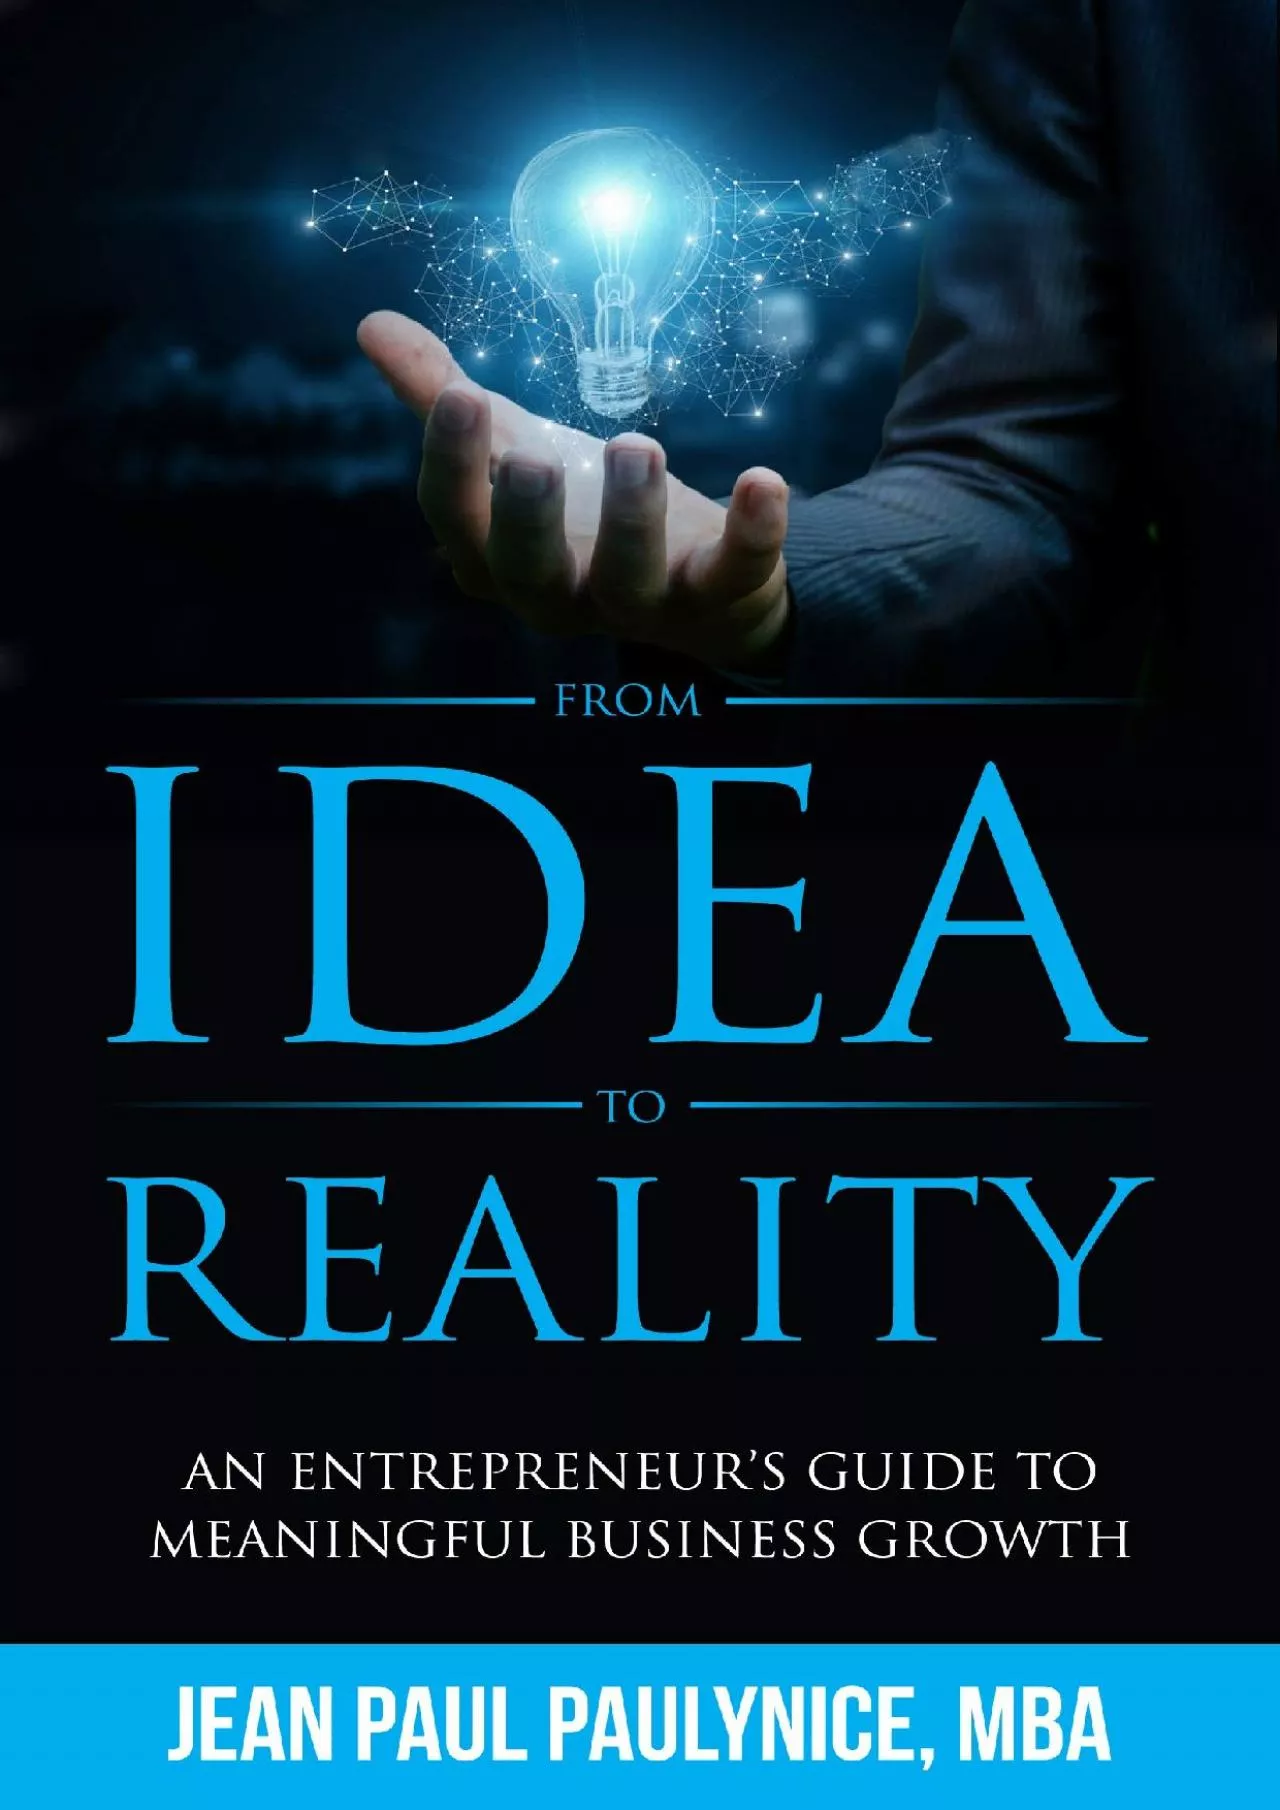 FROM IDEA TO REALITY: AN ENTREPRENEUR’S GUIDE TO MEANINGFUL BUSINESS GROWTH